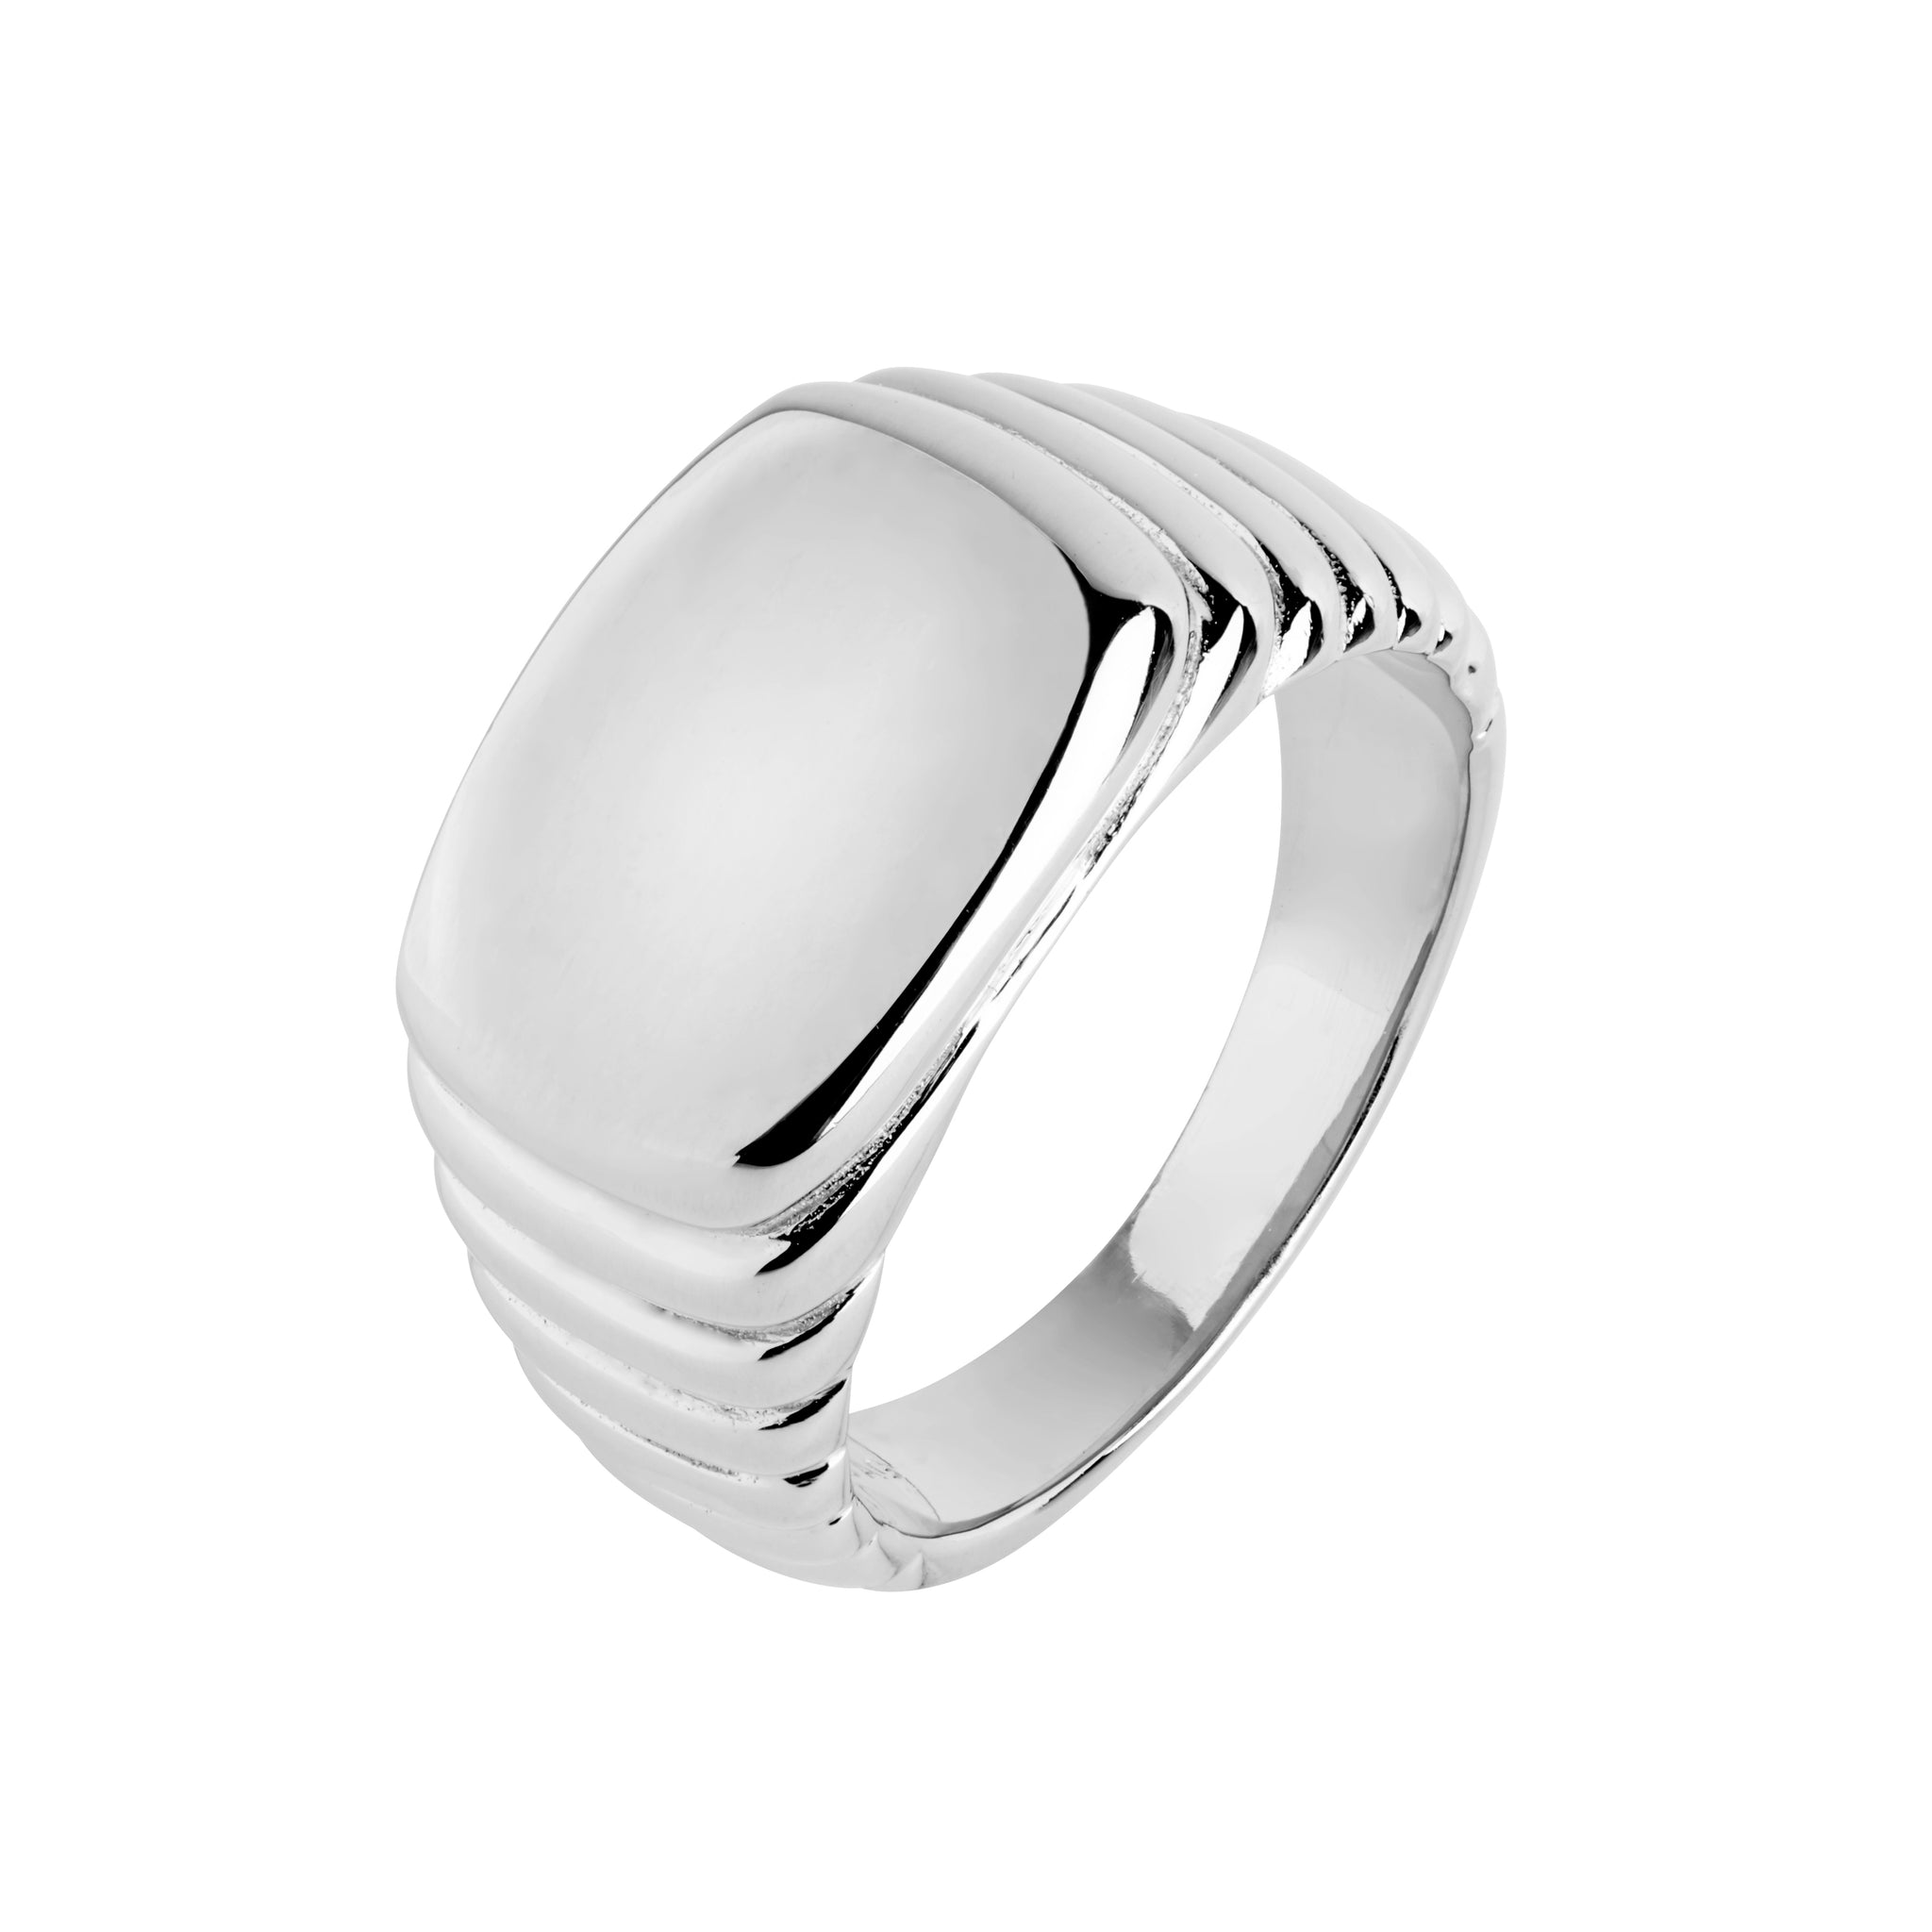 SHORE RING IN SILVER BY MARIA BLACK